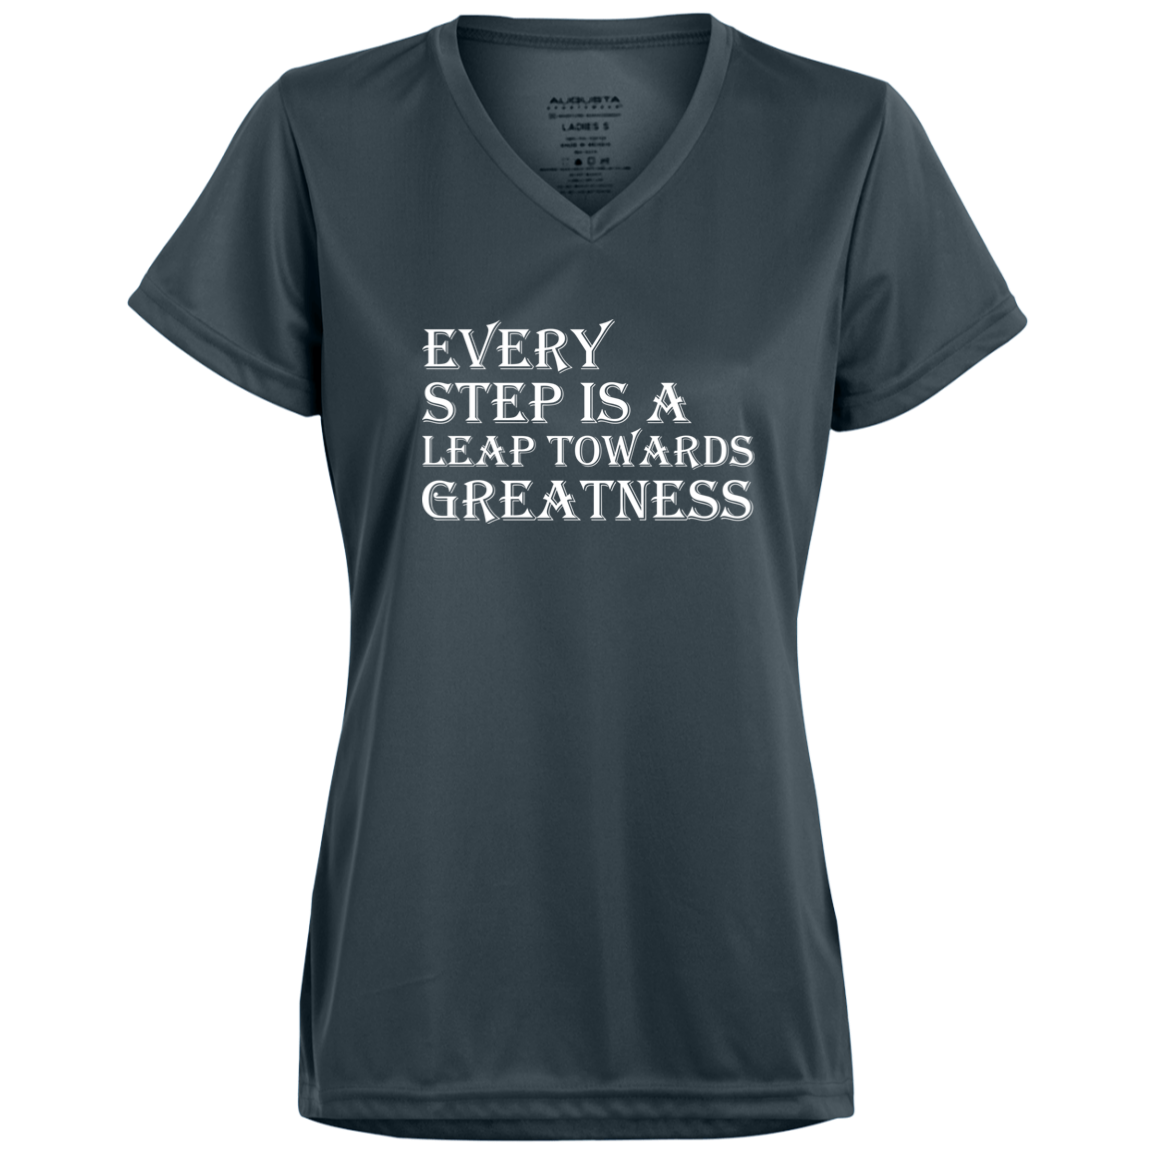 Women's Inspirational Top Every step is a leap towards greatness